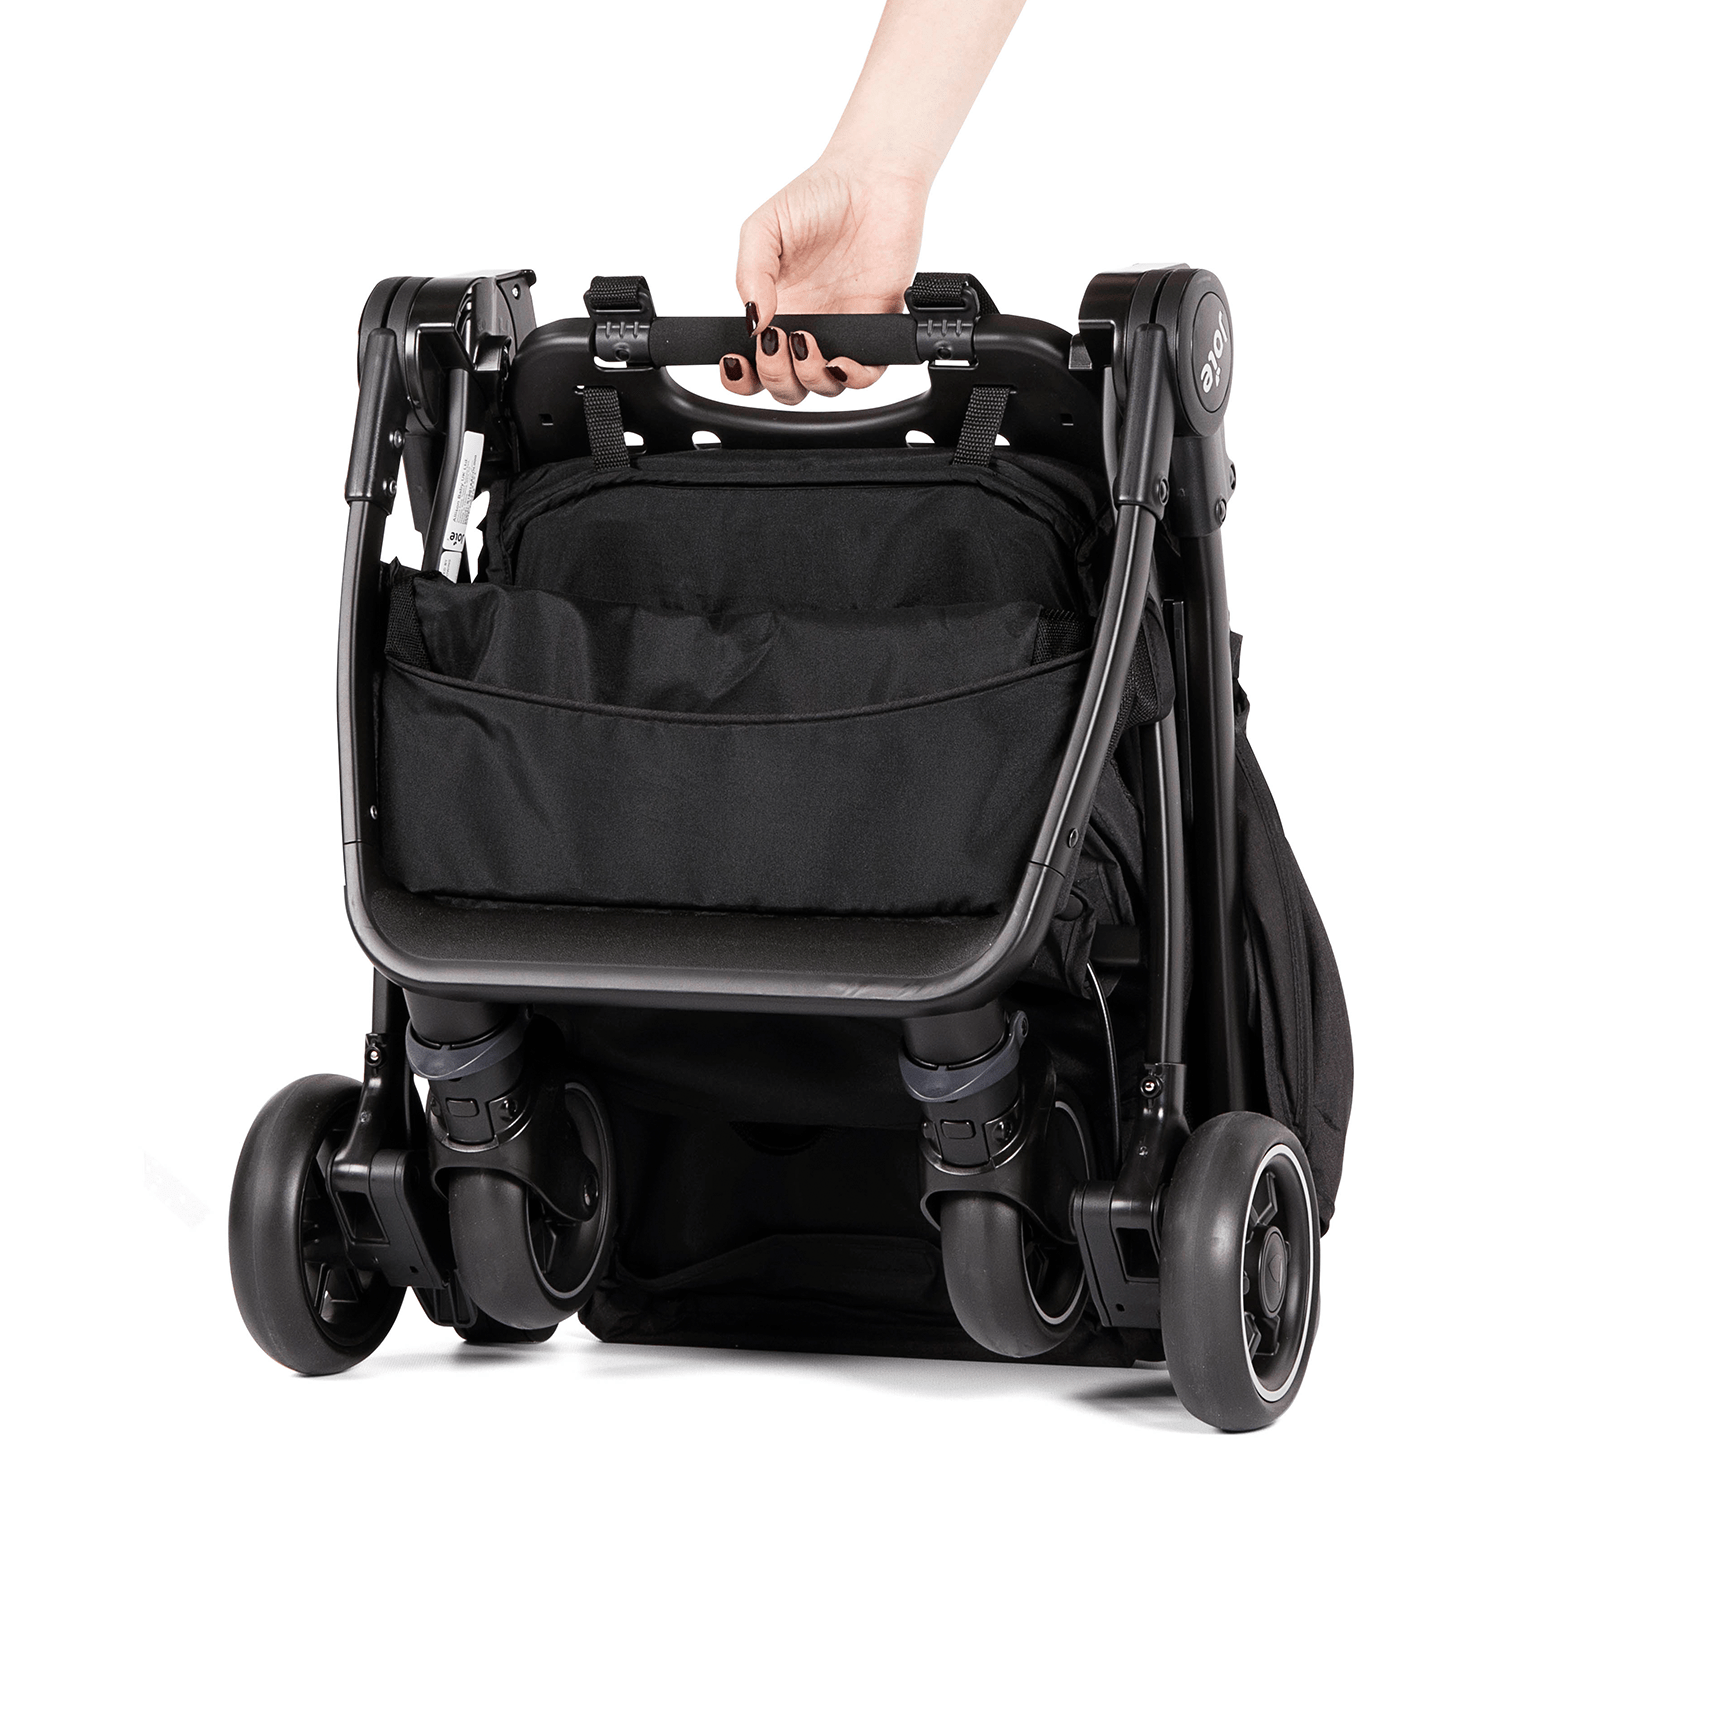 Joie Pushchairs & Buggies Joie Pact Stroller - Ember S1601DAEMB000